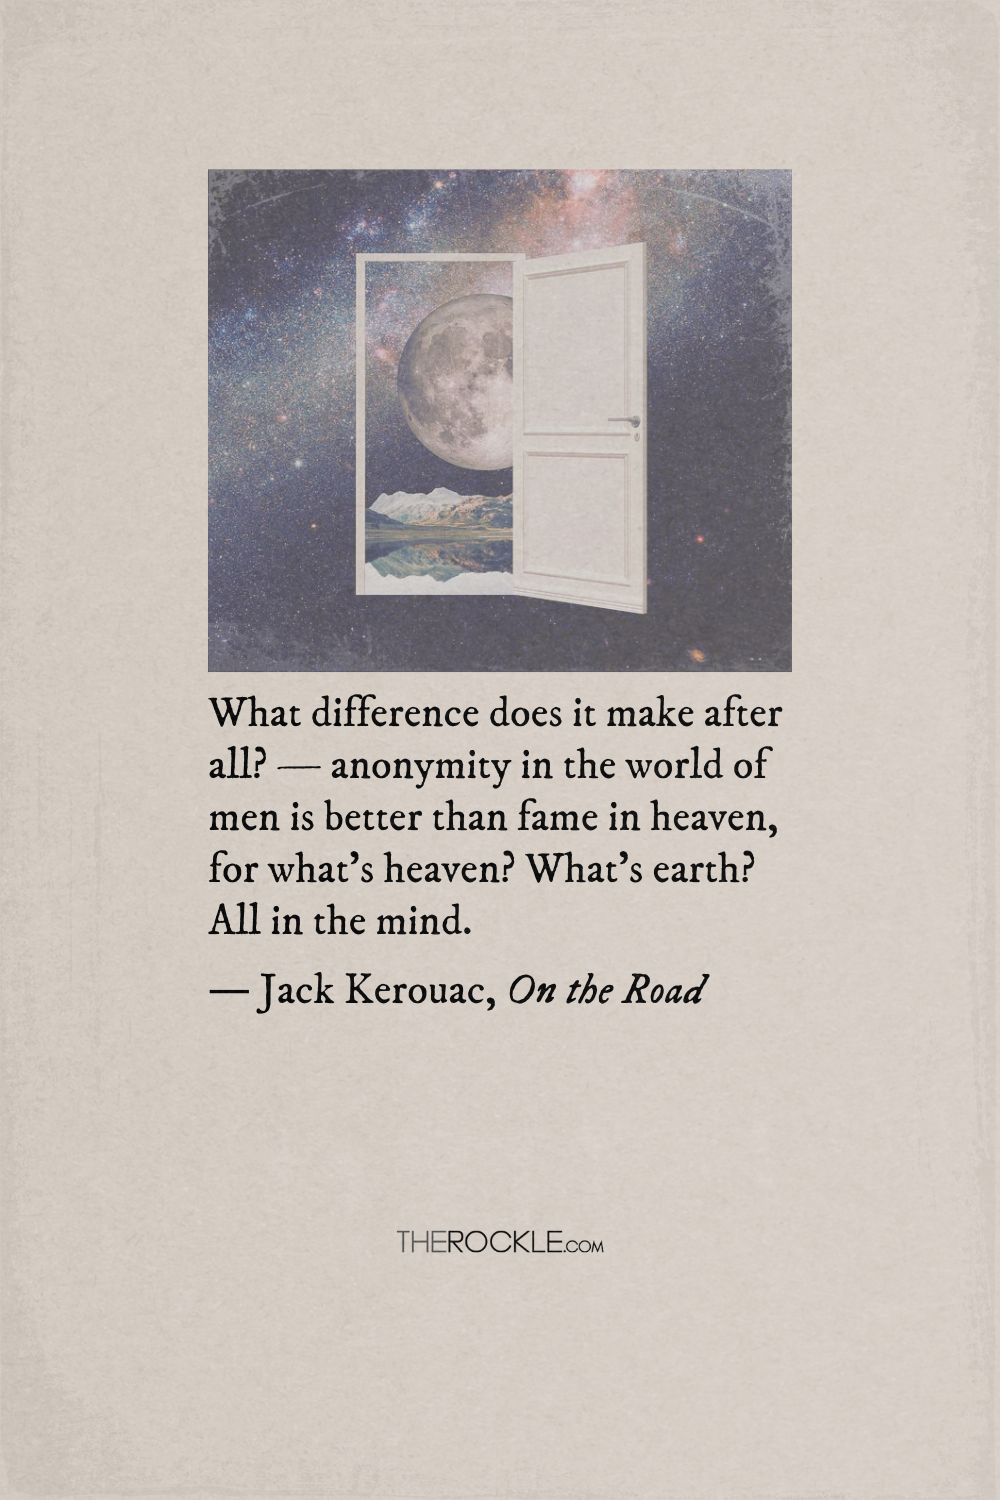 Jack Kerouac on the value of anonymity